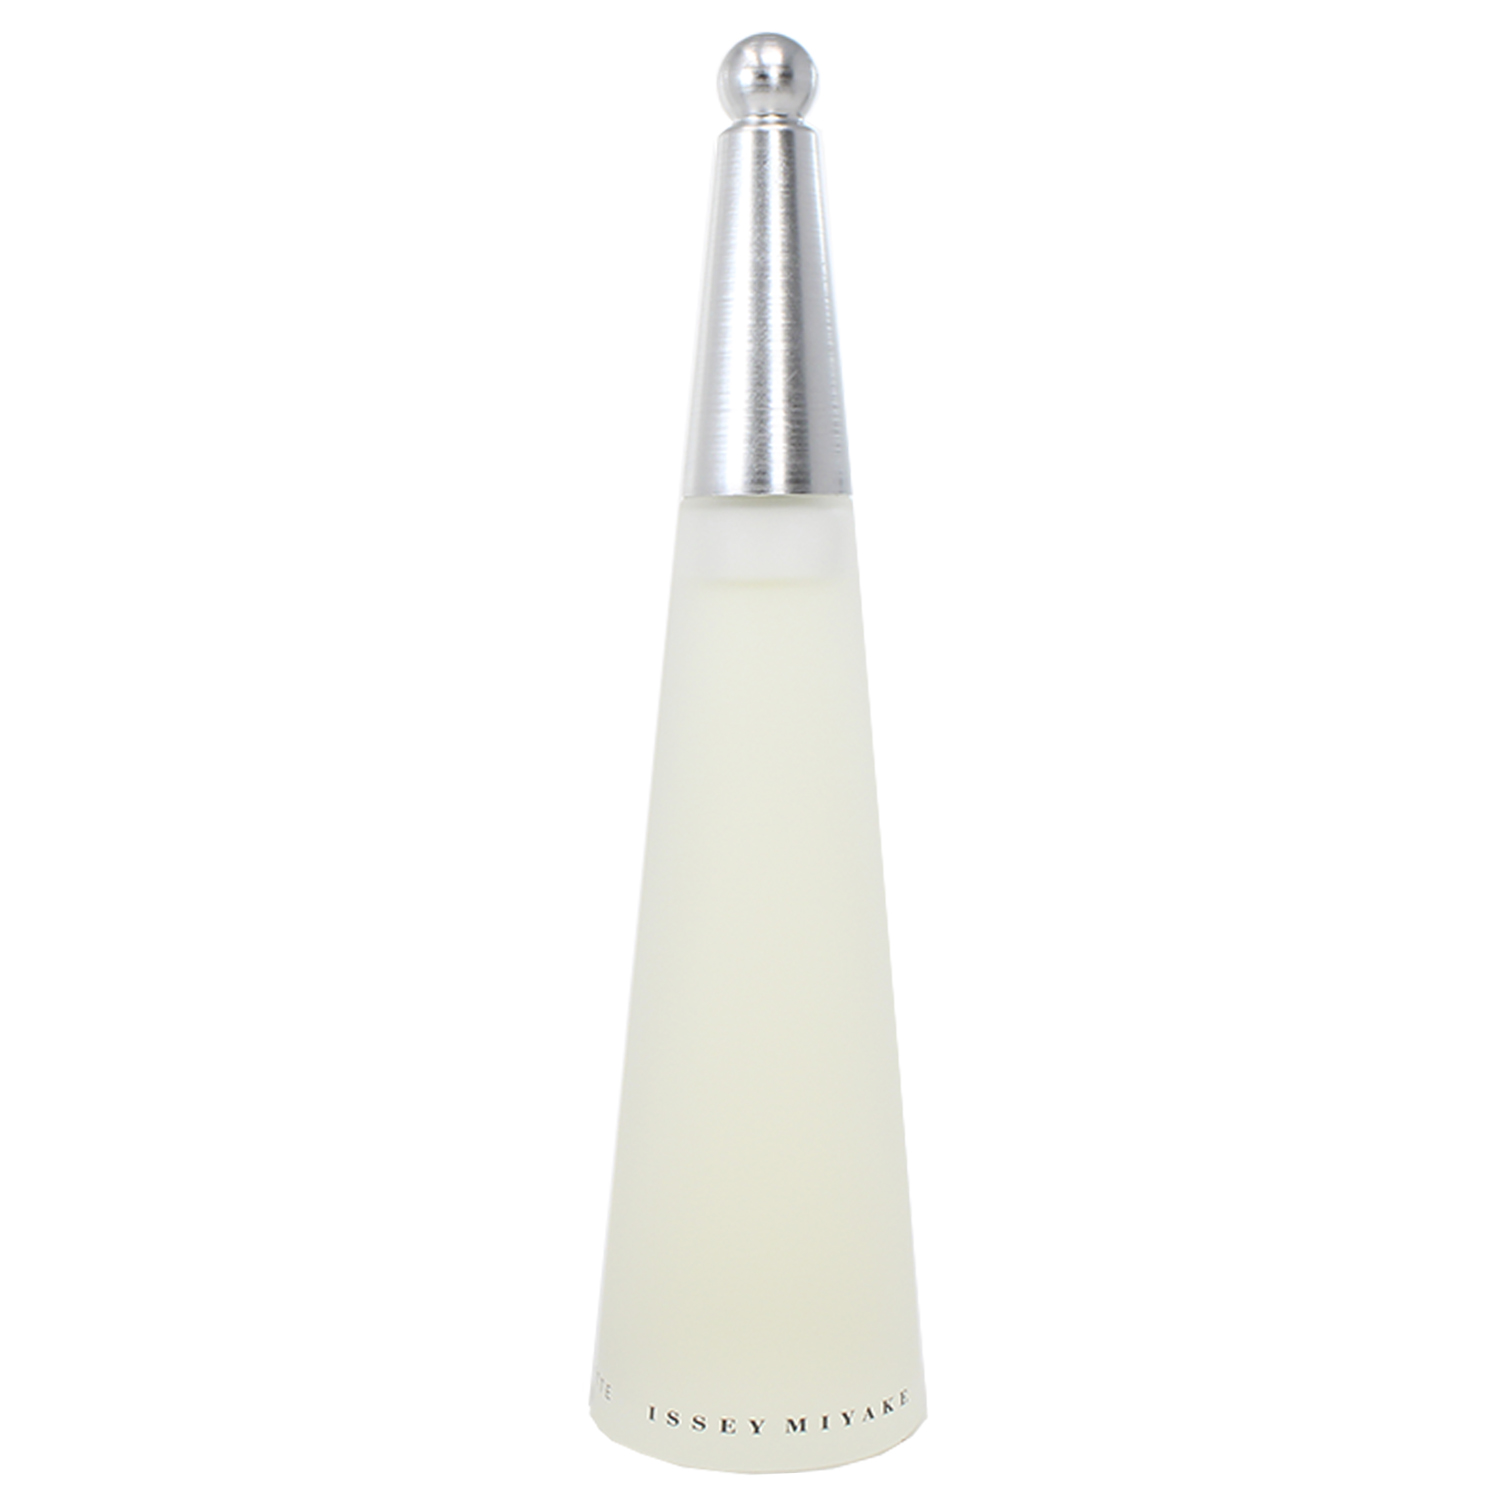 Issey Miyake Woman 3.4 Edt Sp - image 3 of 4